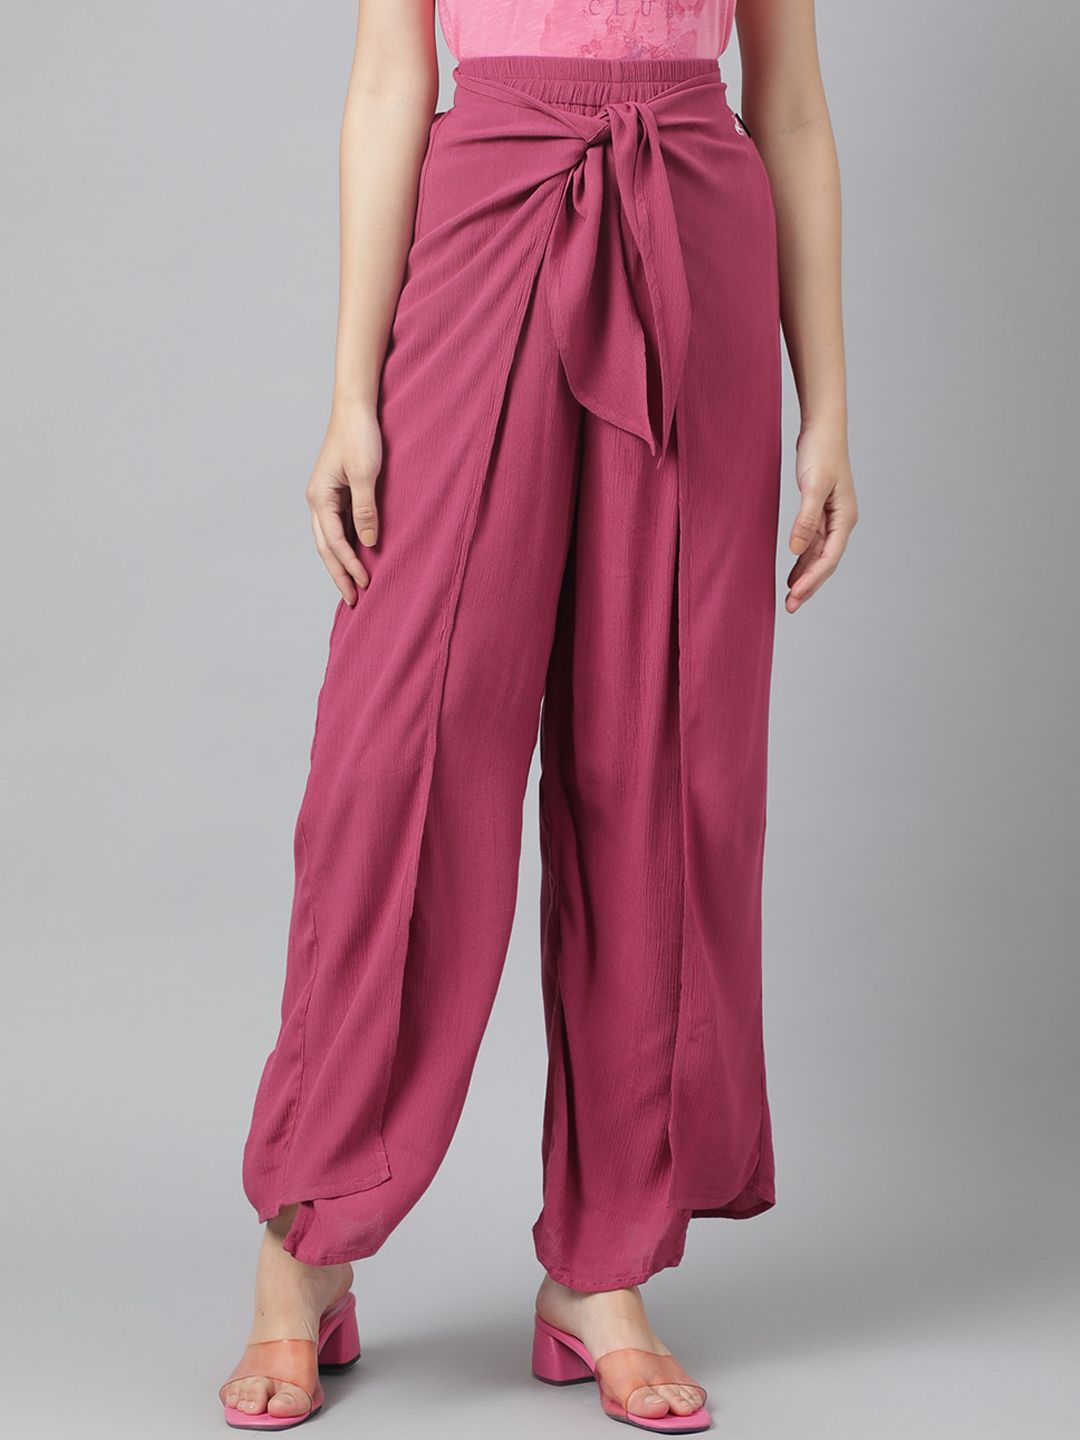 Beverly Hills Polo Club Women Mid-Rise Parallel Trousers Price in India